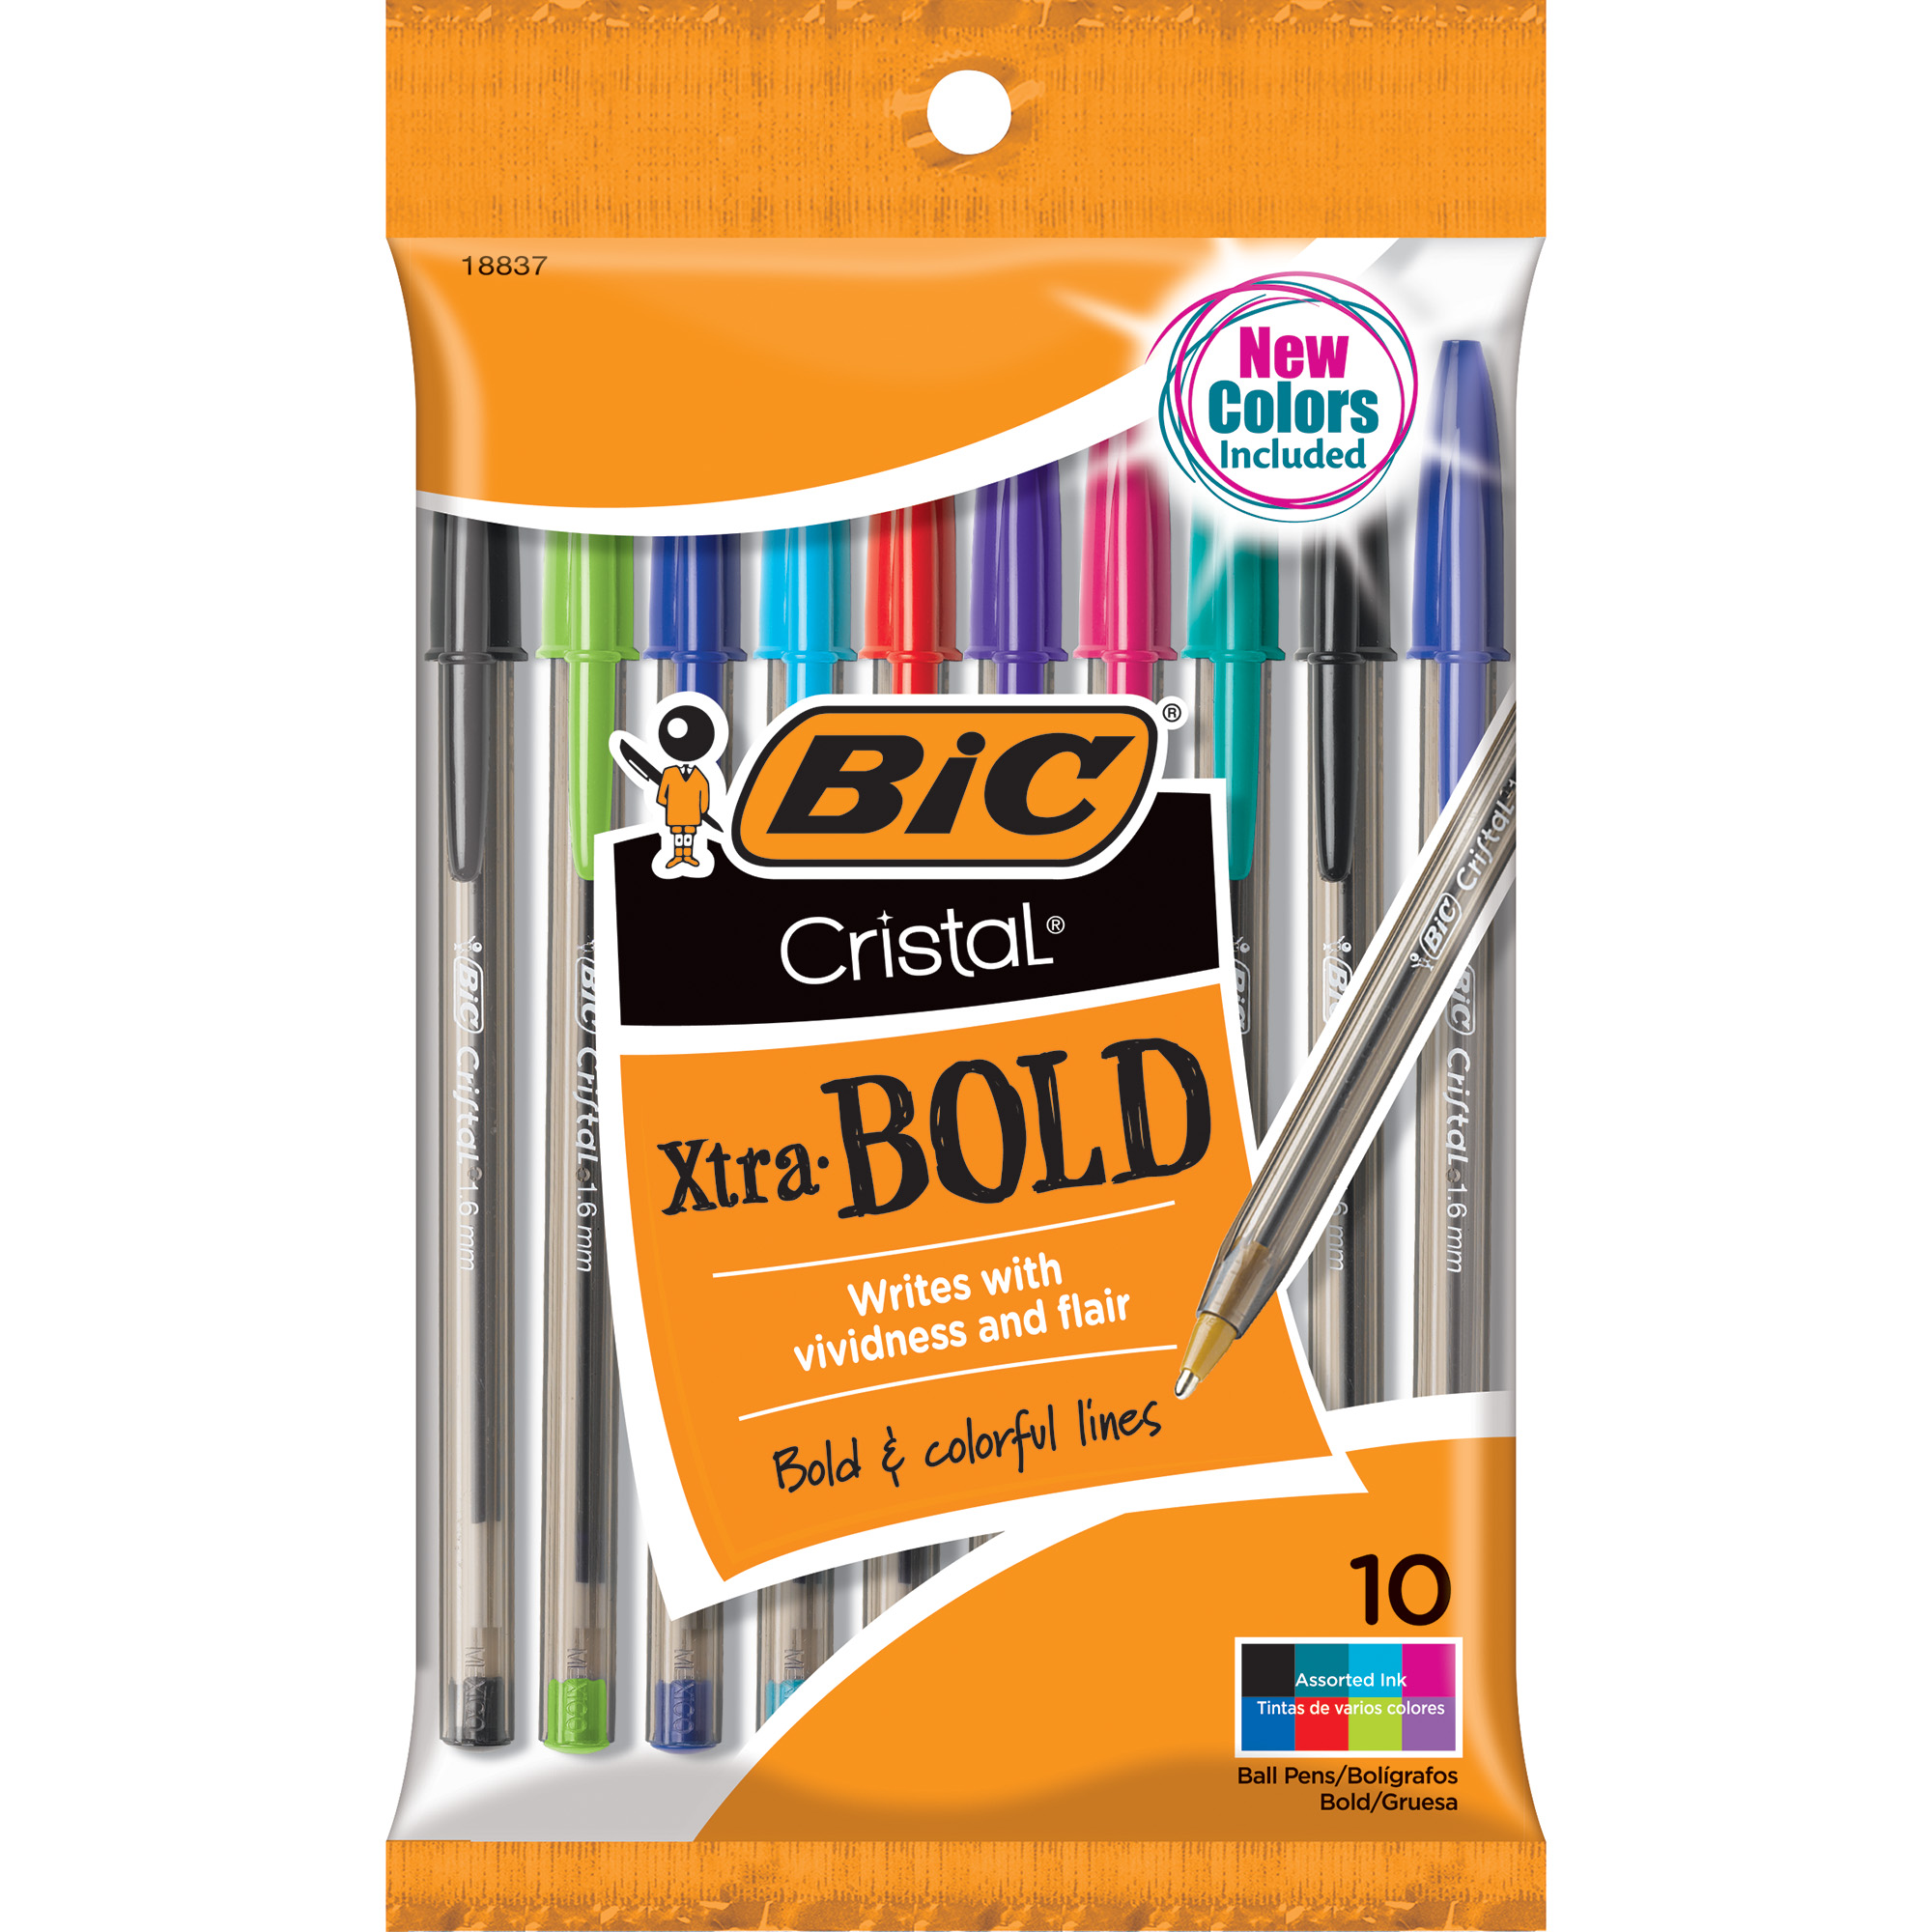 BIC Cristal Xtra Bold Ballpoint Stick Pens, Bold Point, 1.6 mm, Assorted Ink Colors, Pack of 10 - image 1 of 6